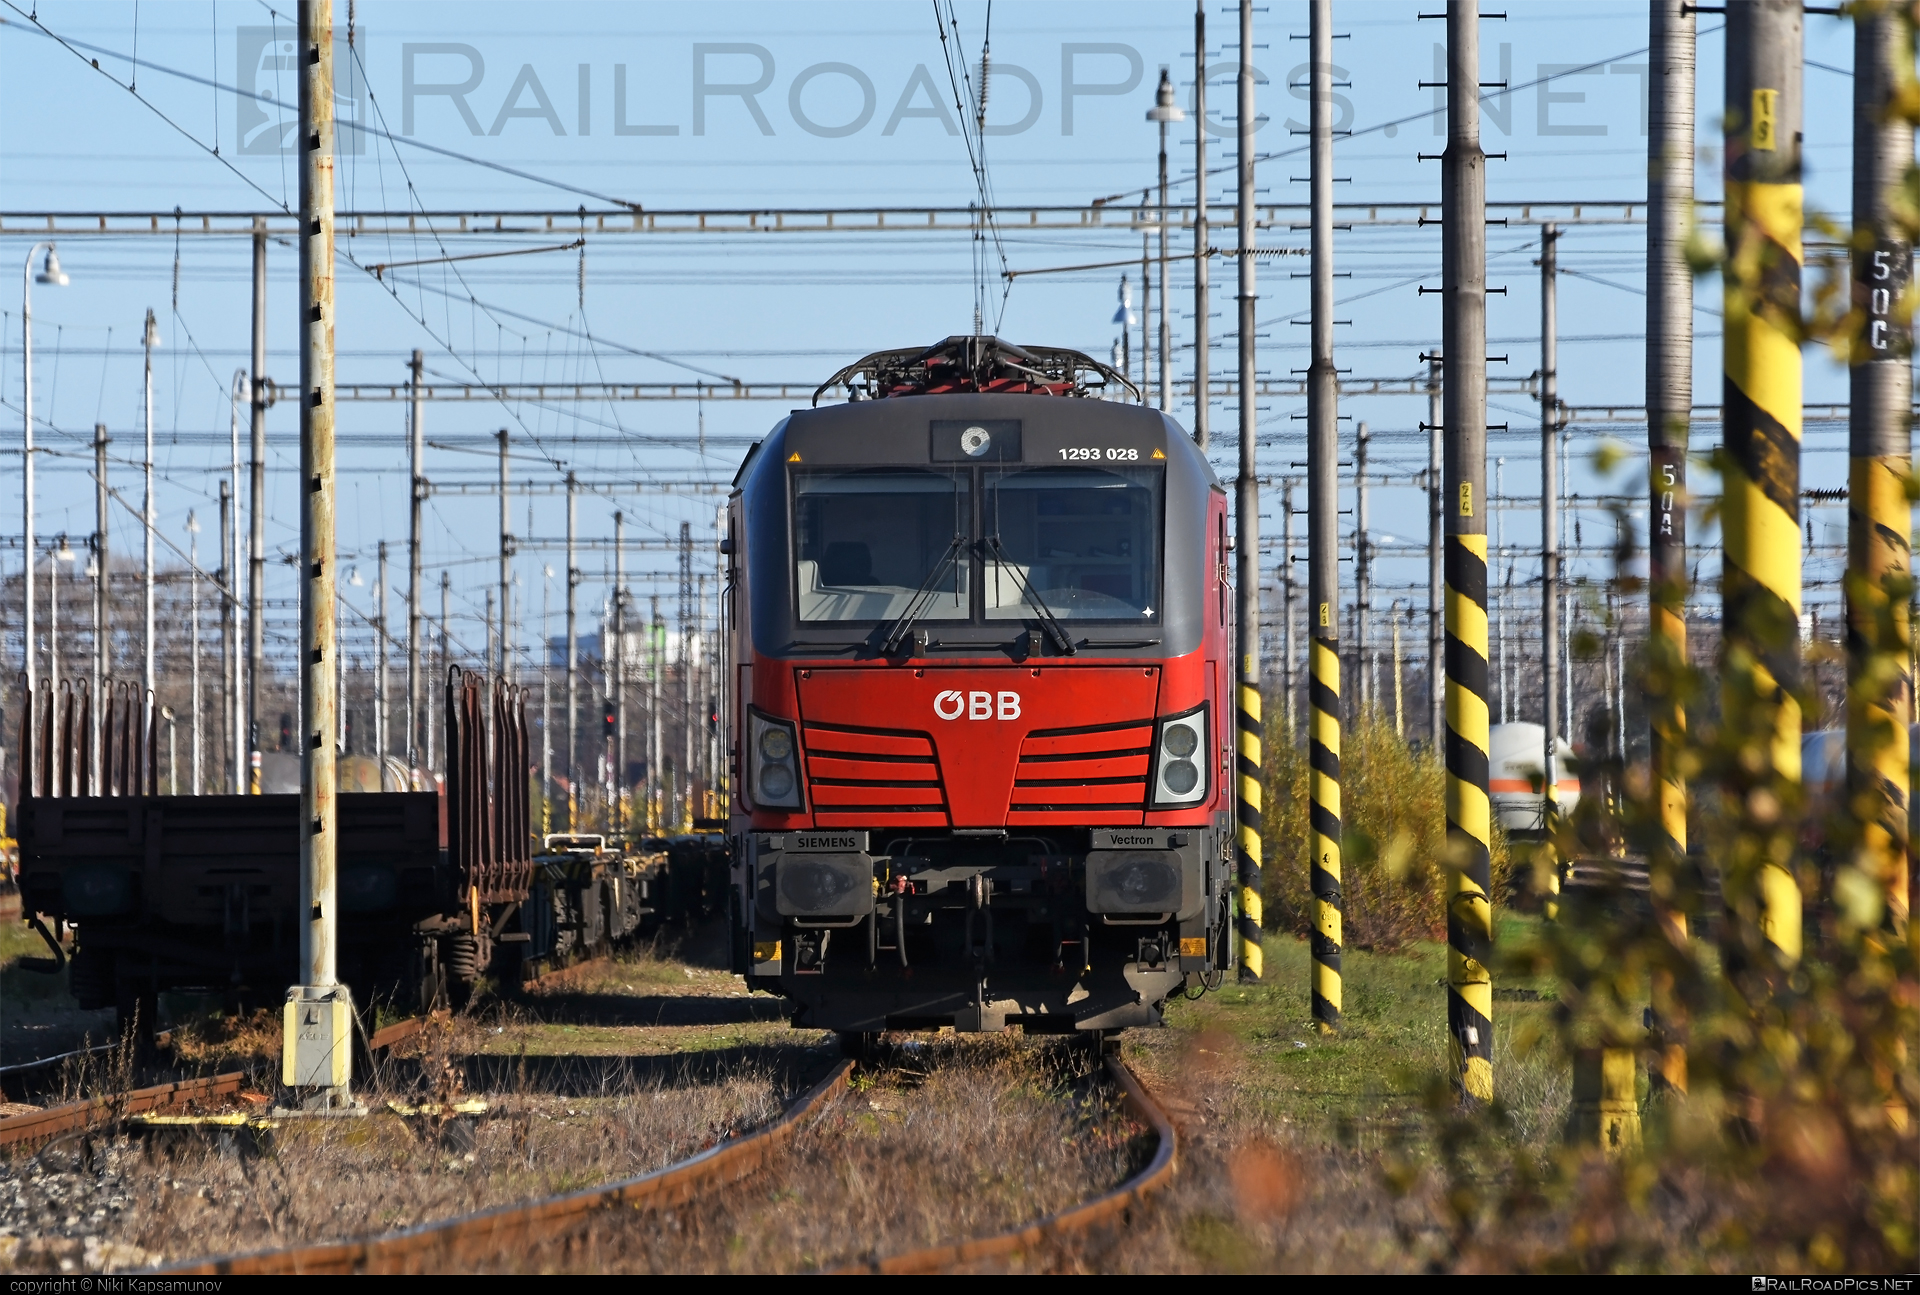 Siemens Vectron MS - 1293 028 operated by Rail Cargo Carrier – Slovakia s.r.o. #obb #osterreichischebundesbahnen #rccsk #siemens #siemensvectron #siemensvectronms #vectron #vectronms #wssk